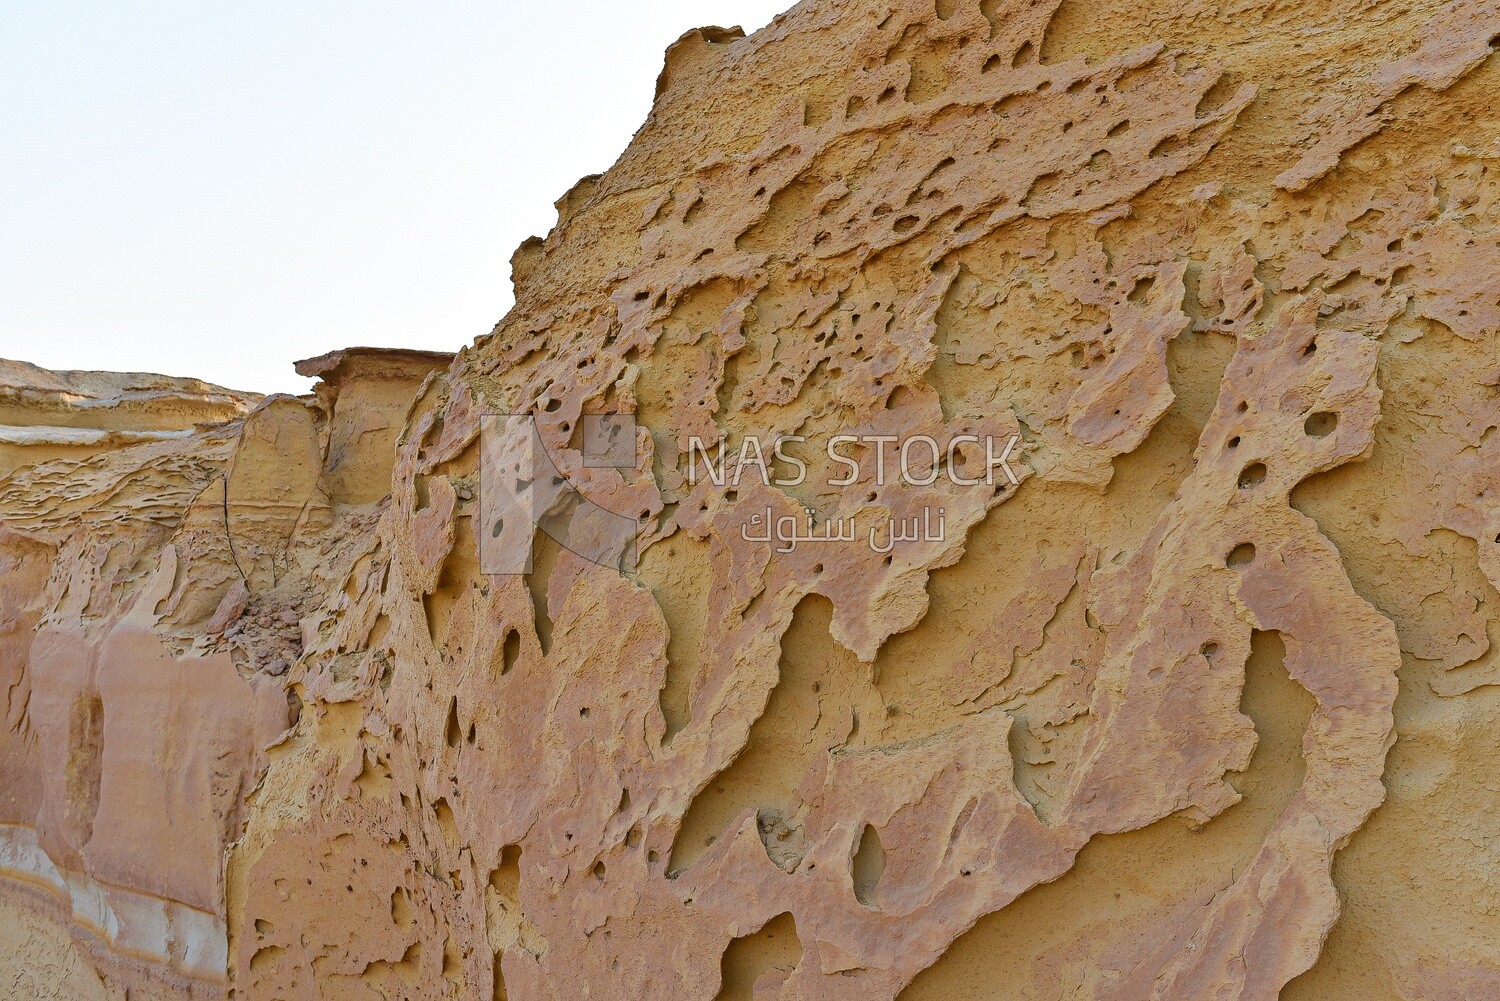 Scene of pits and passages carved on a sandy mountain in the Wadi El Hitan desert in Egypt